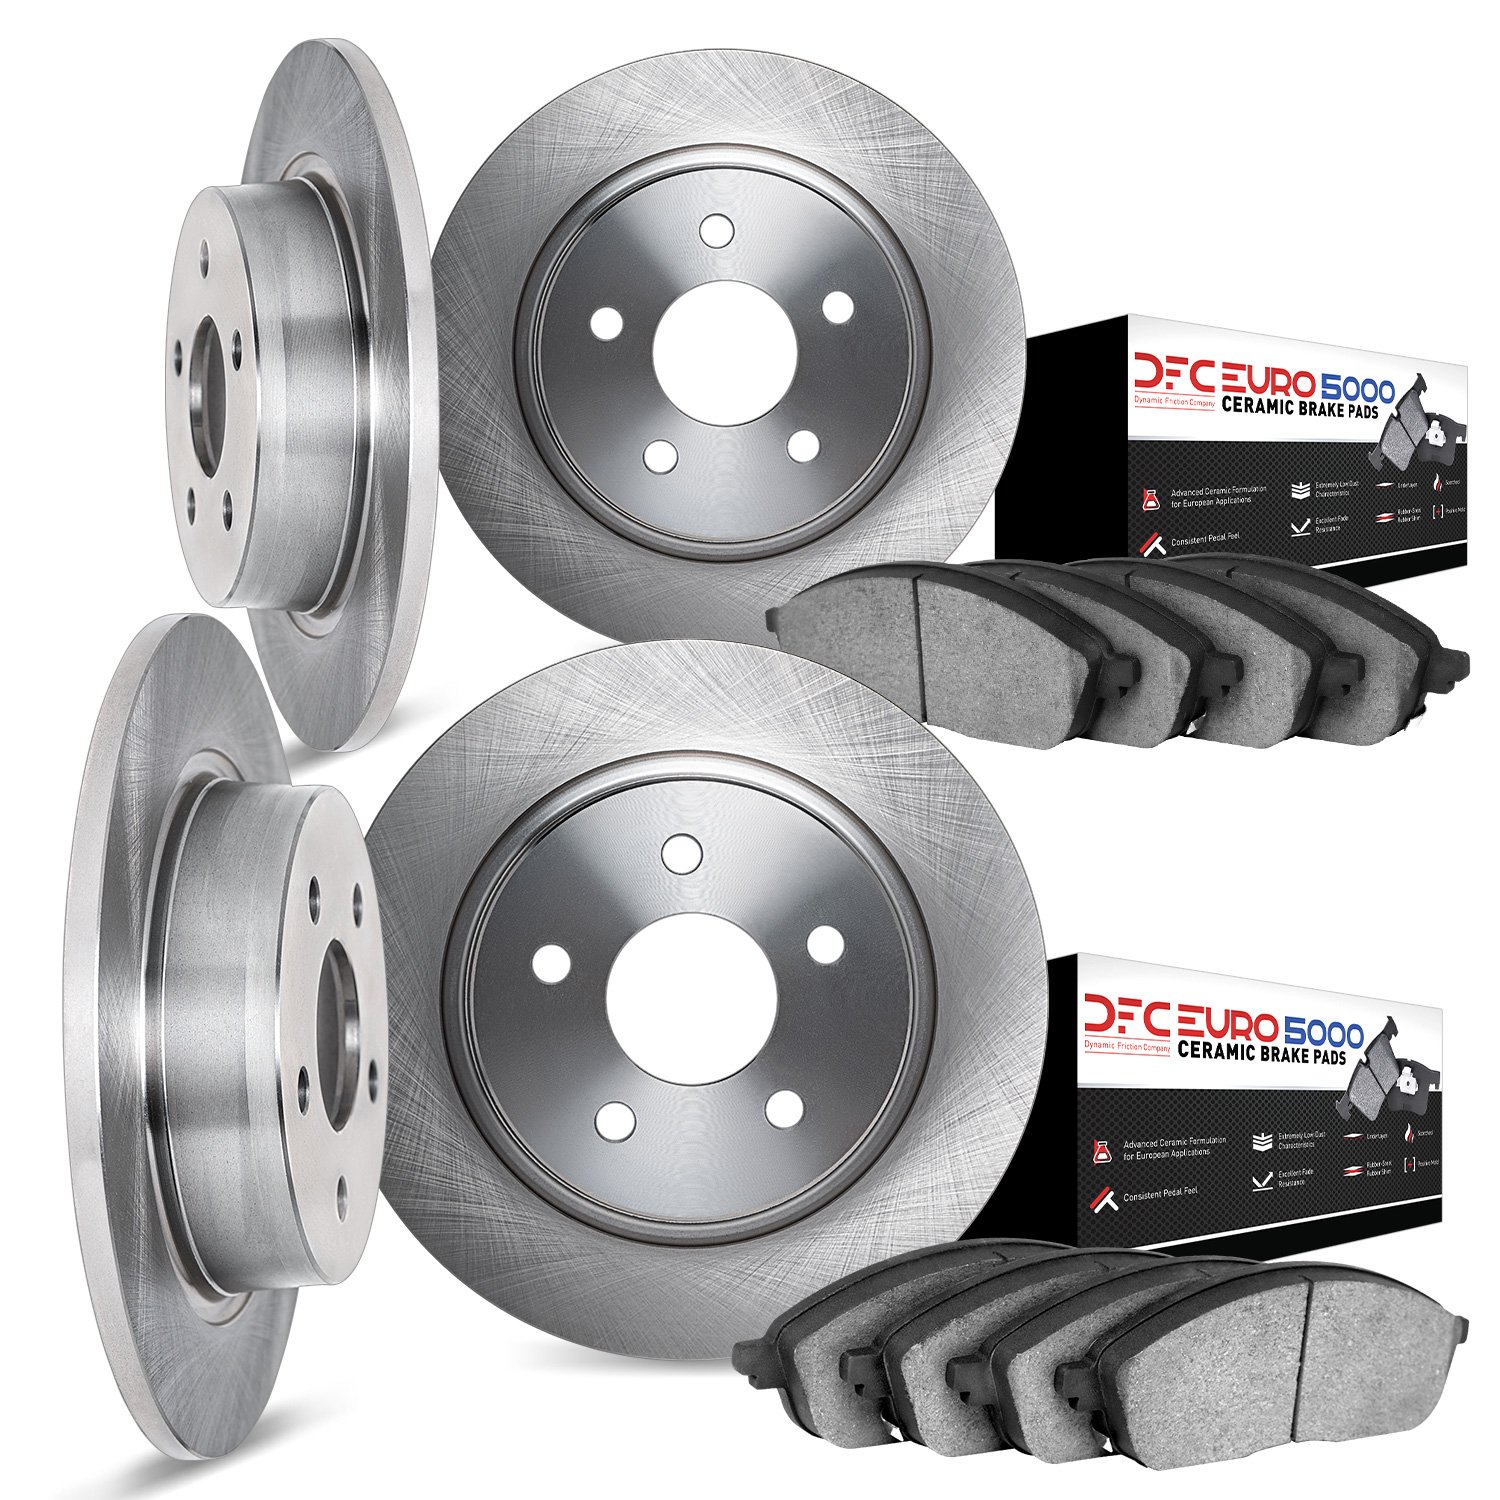 6604-63015 Brake Rotors w/5000 Euro Ceramic Brake Pads, 1997-1998 Mercedes-Benz, Position: Front and Rear